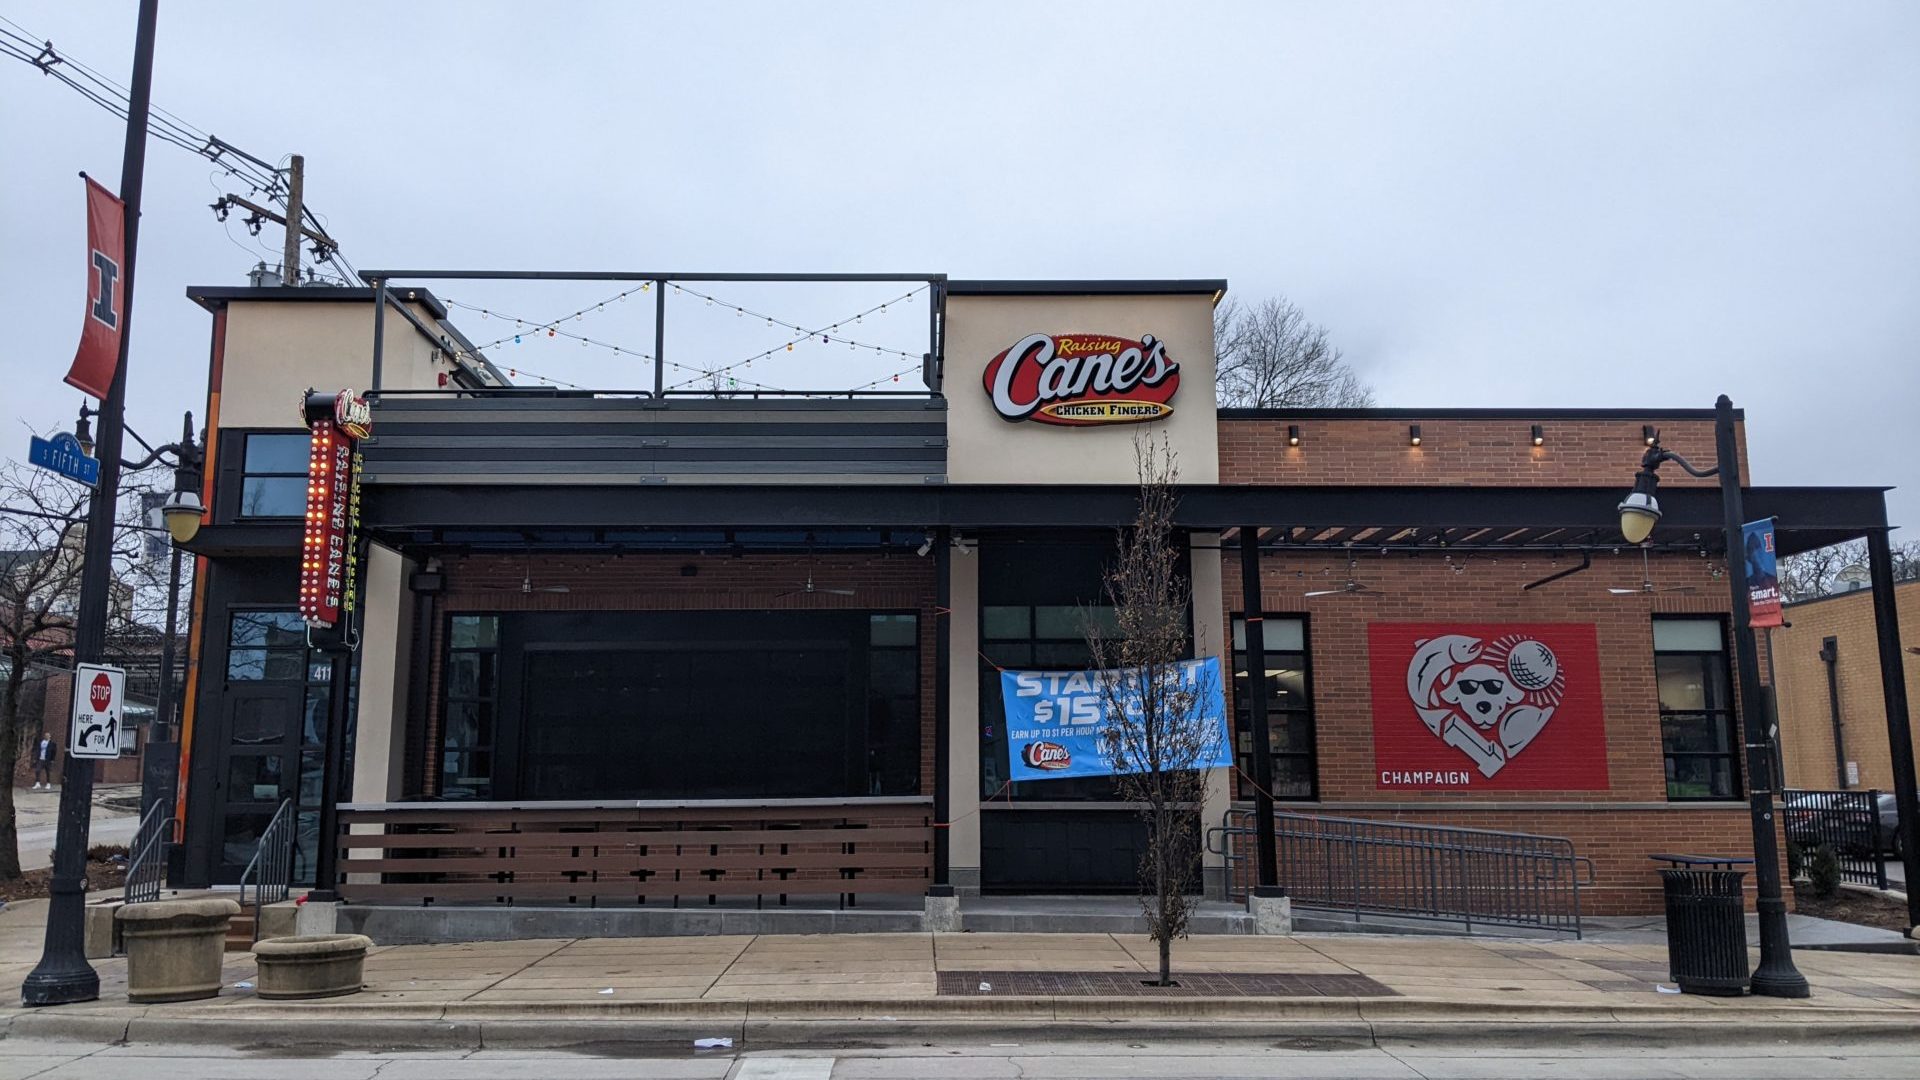 The front of a brick building. It has metal accents and lights strung across the top. There is a sign that says Raising Cane's Chicken Fingers, as well as a square sign with a red background and silver heart comprised of pictures of a dog, disco ball, fish, hat, and block I.